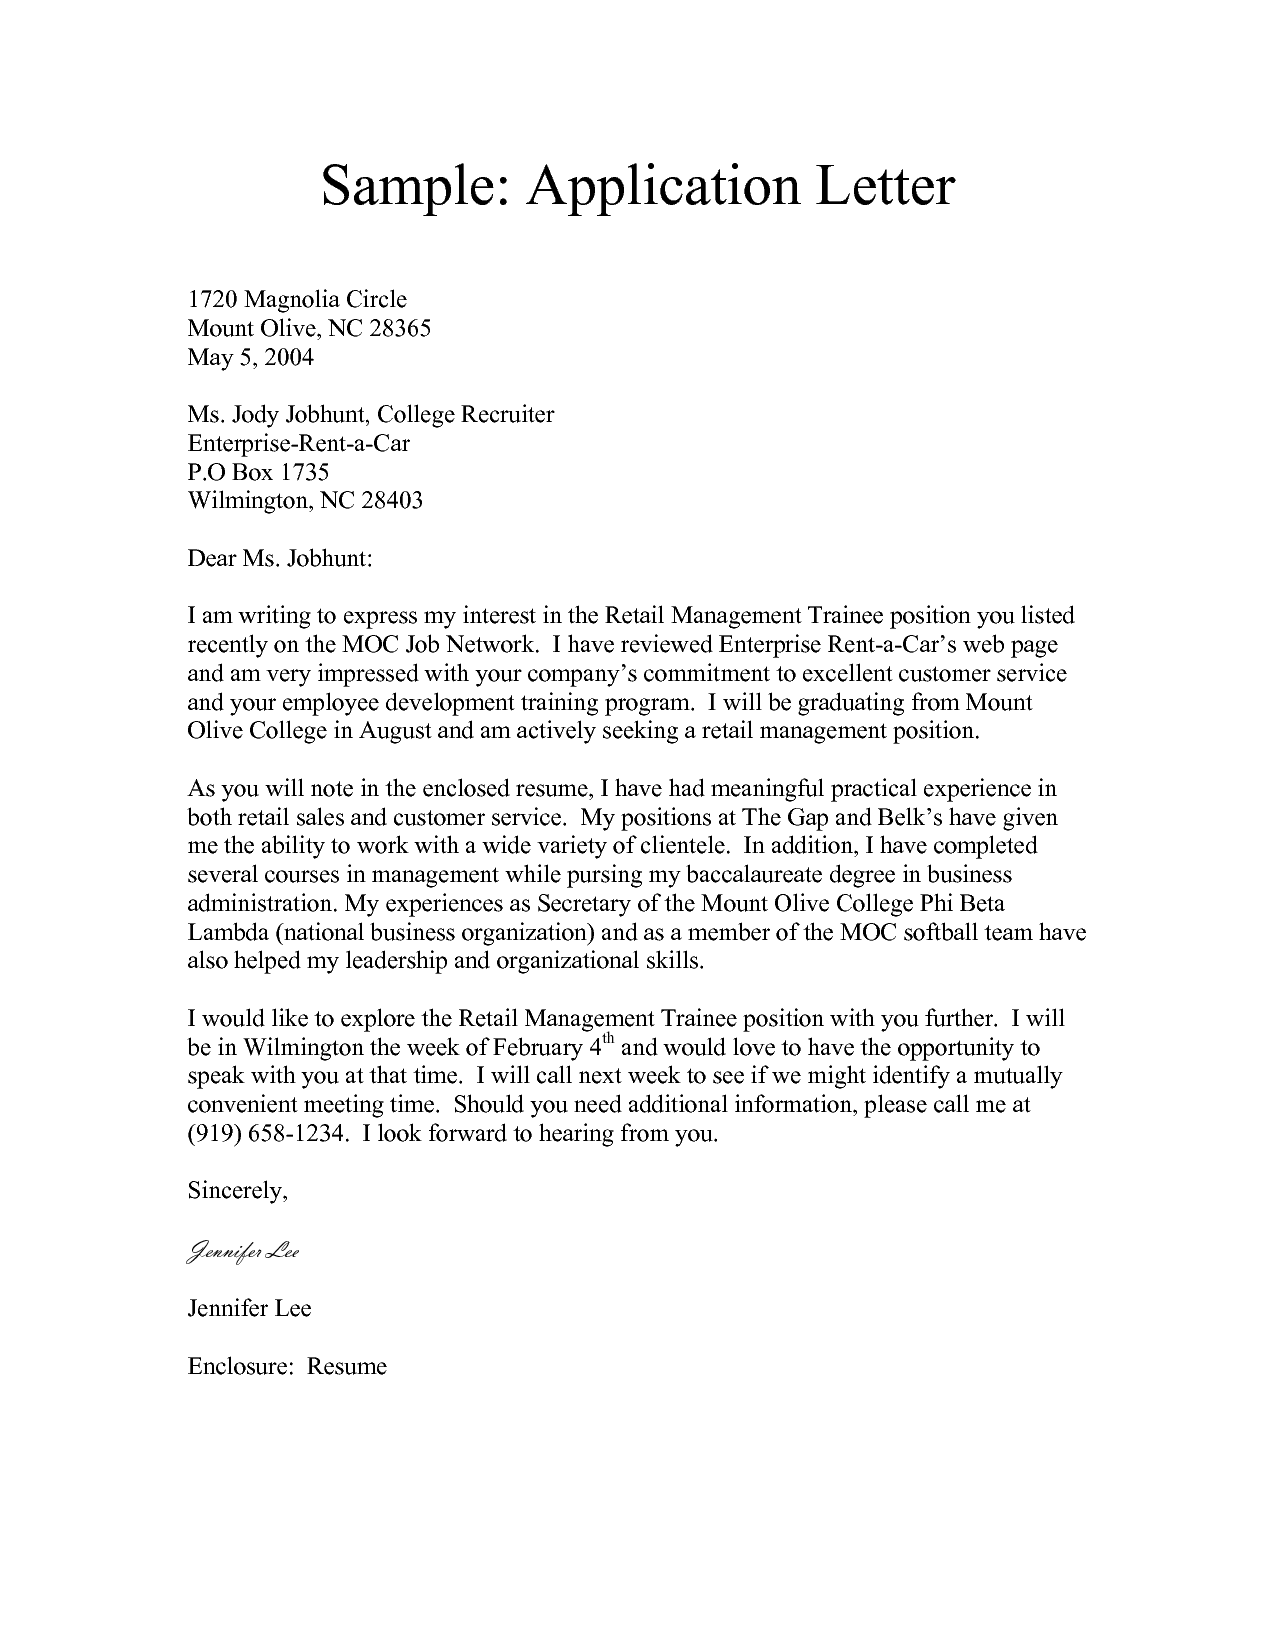 types of application letter in business communication